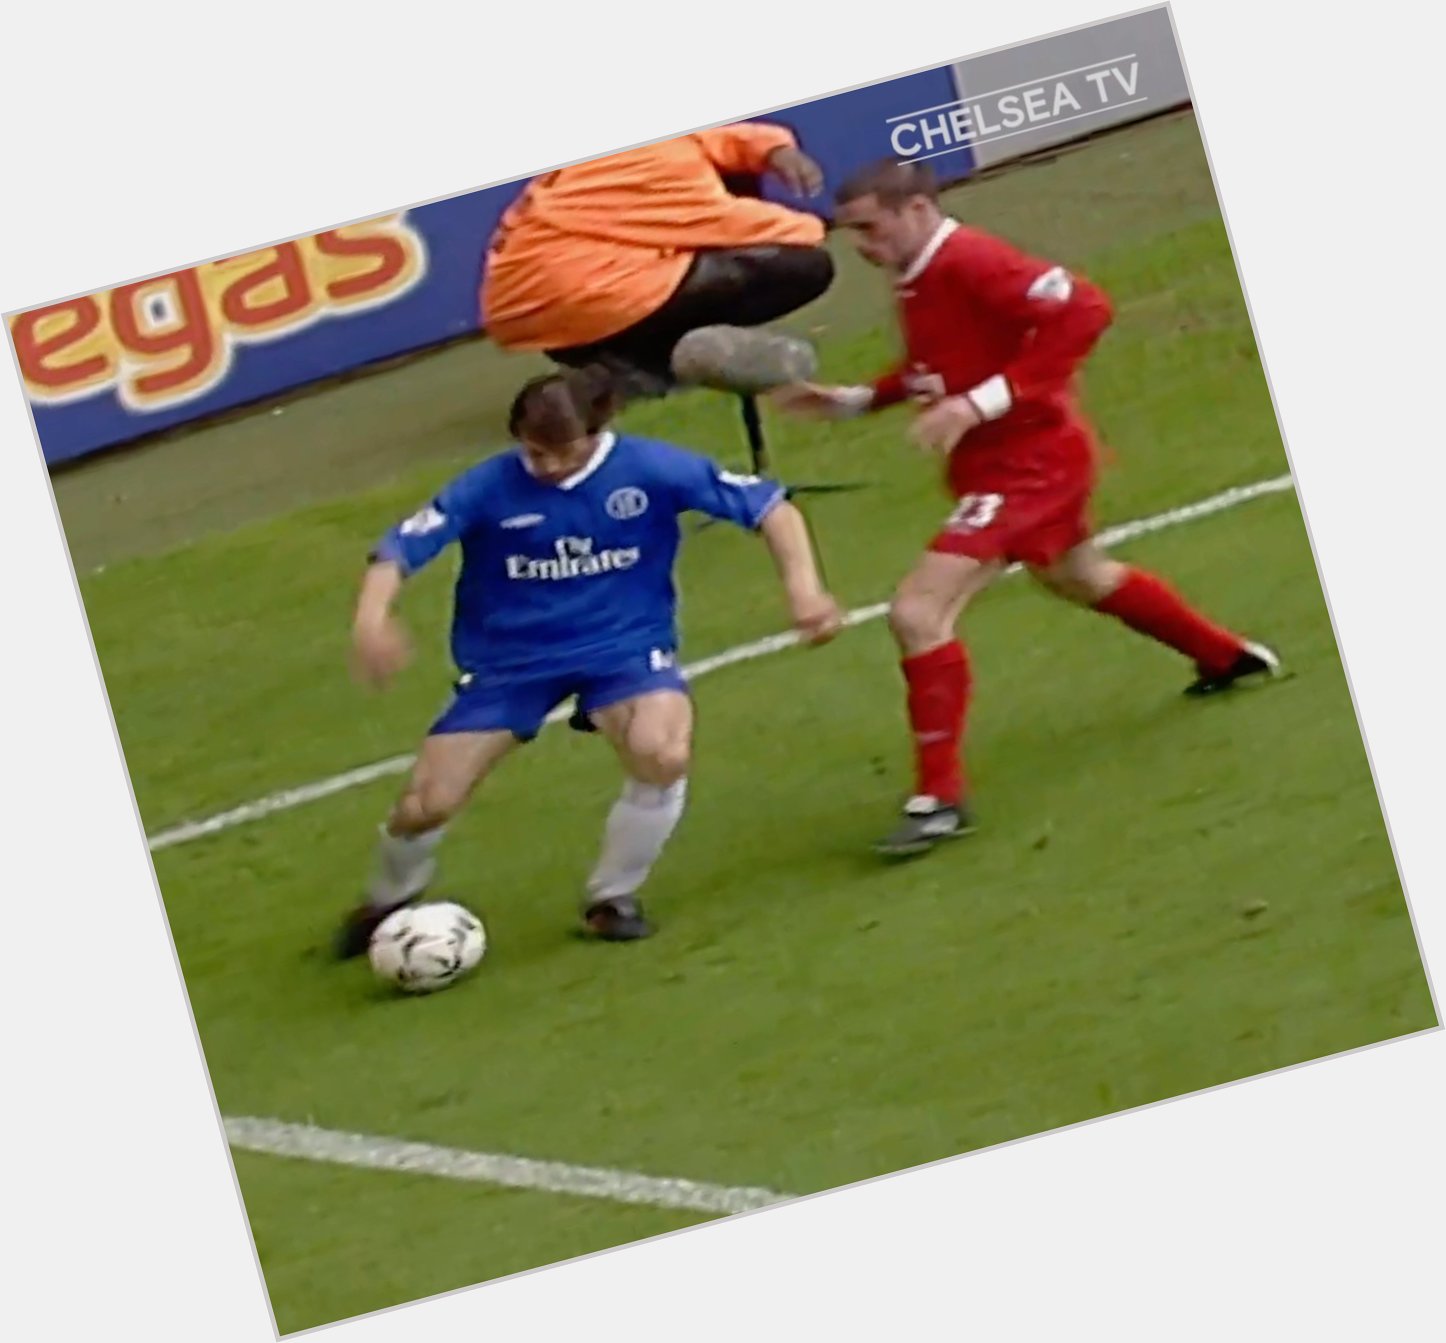 Happy 55th birthday, Gianfranco Zola!

Throwback to when he took on Jamie Carragher 